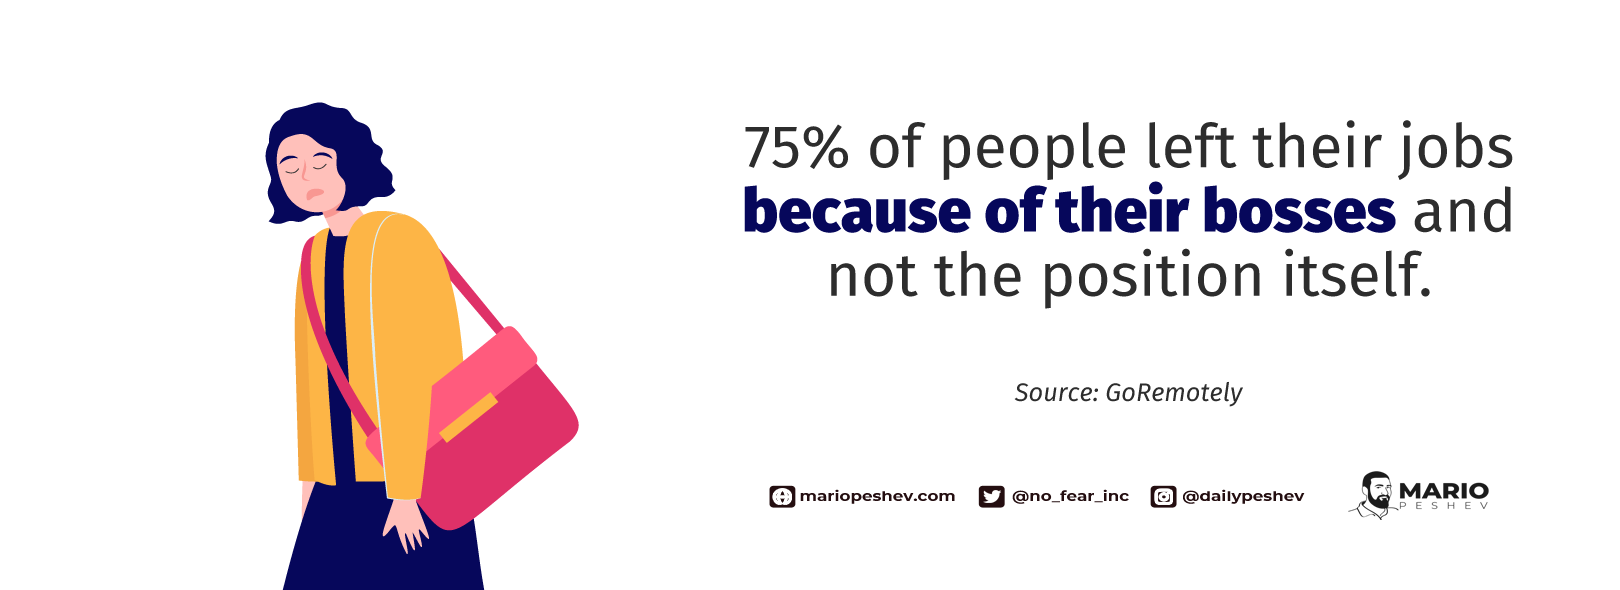 Percentage of people who left their jobs